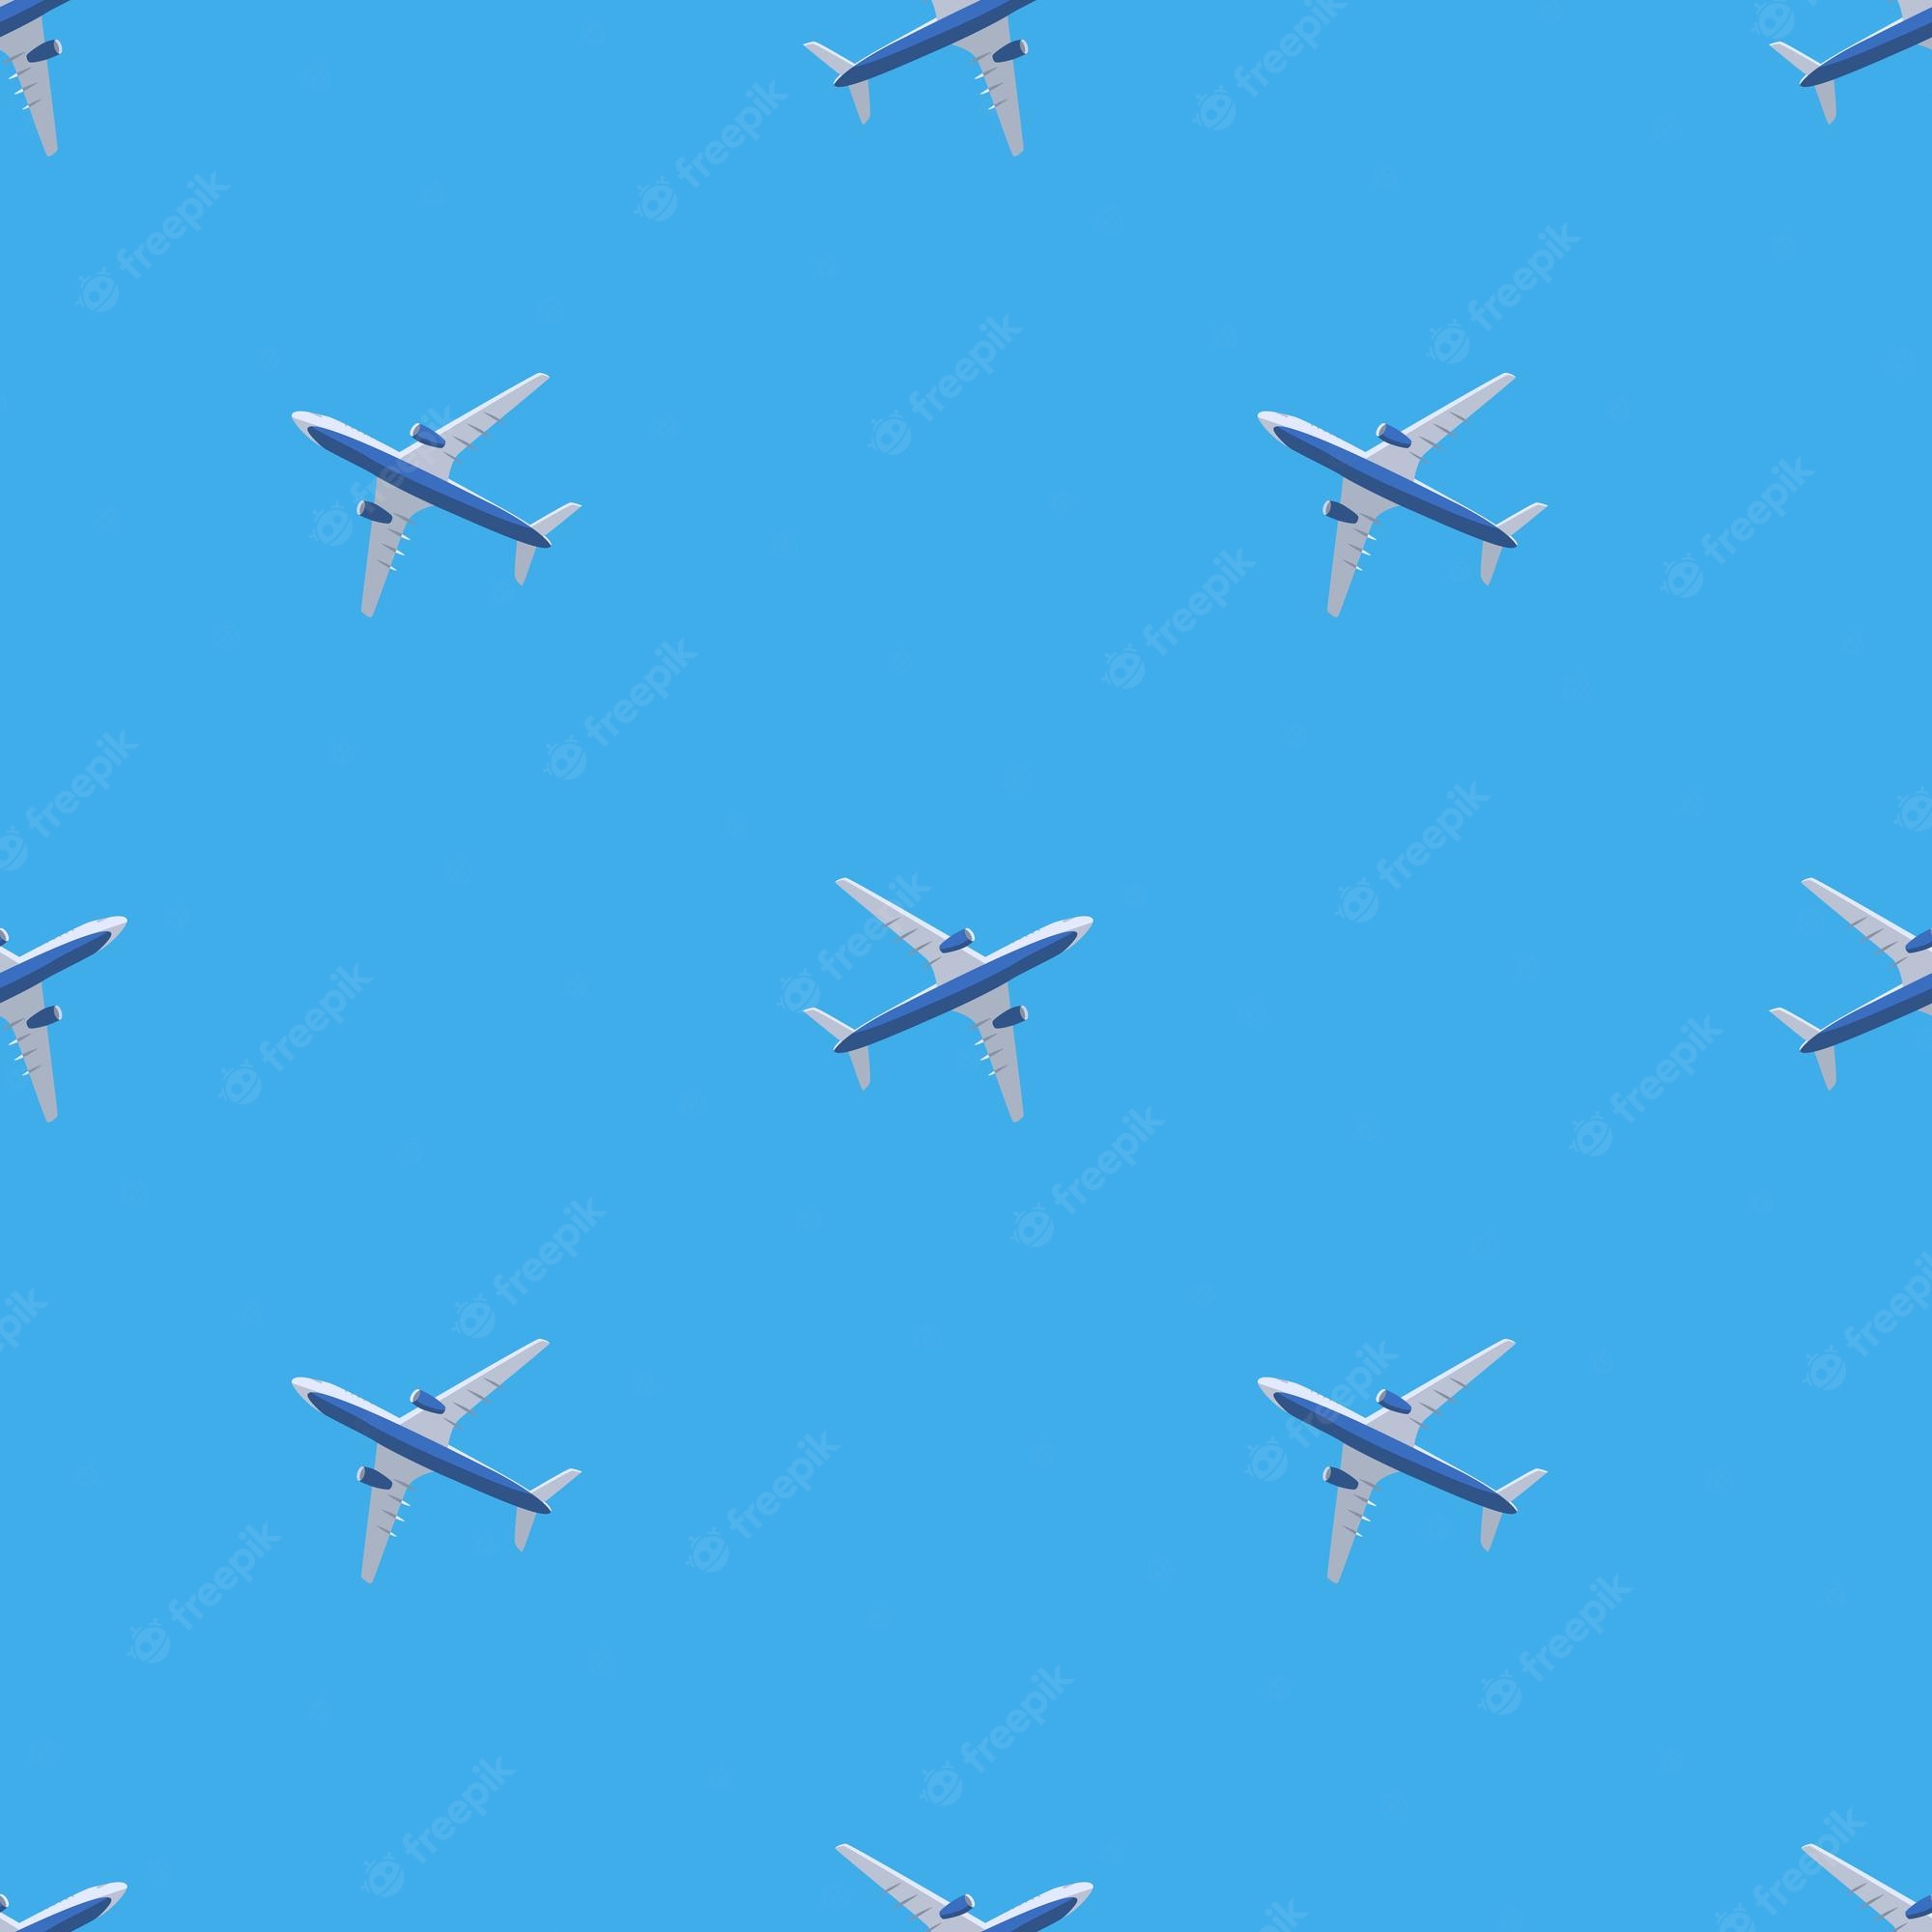 Airplane wallpaper images